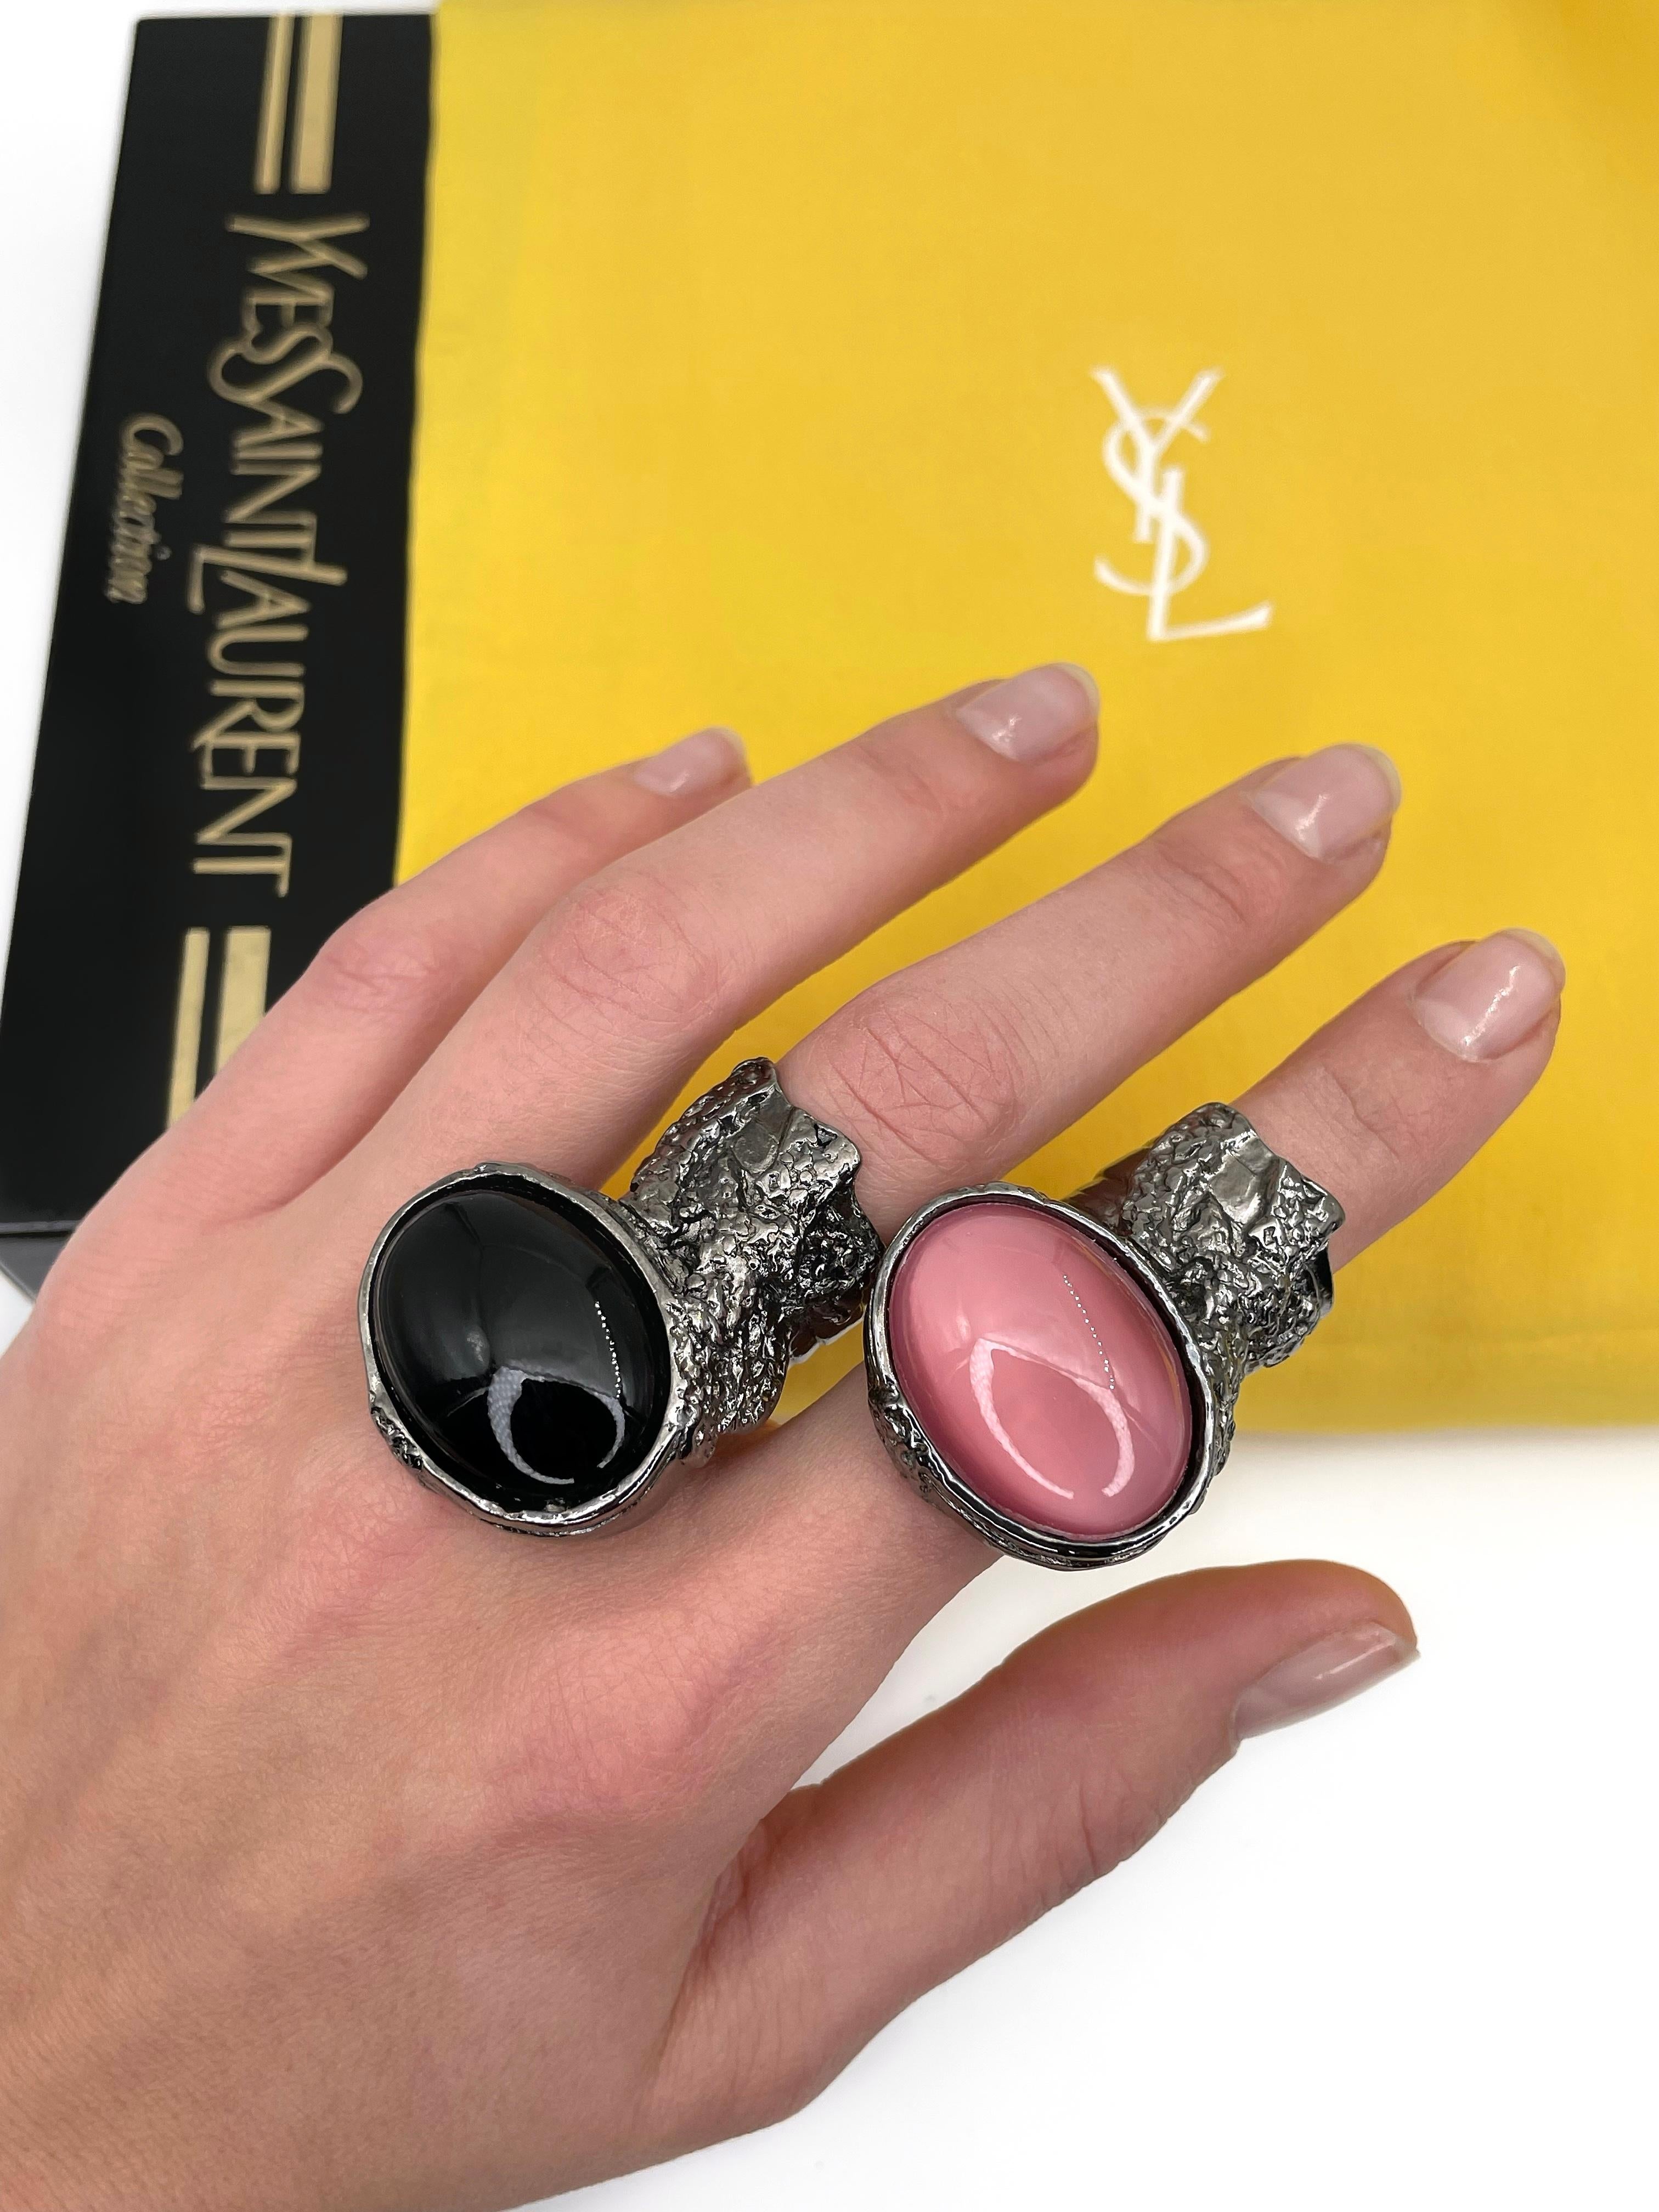 This is an iconic Arty cocktail ring designed by YSL in 2000s. The piece is crafted in silver tone metal. It features cabochon cut black glass. 

Signed: “Yves Saint Laurent - 7” (shown in photos).

Size: 17.75 (US 7)

———

If you have any